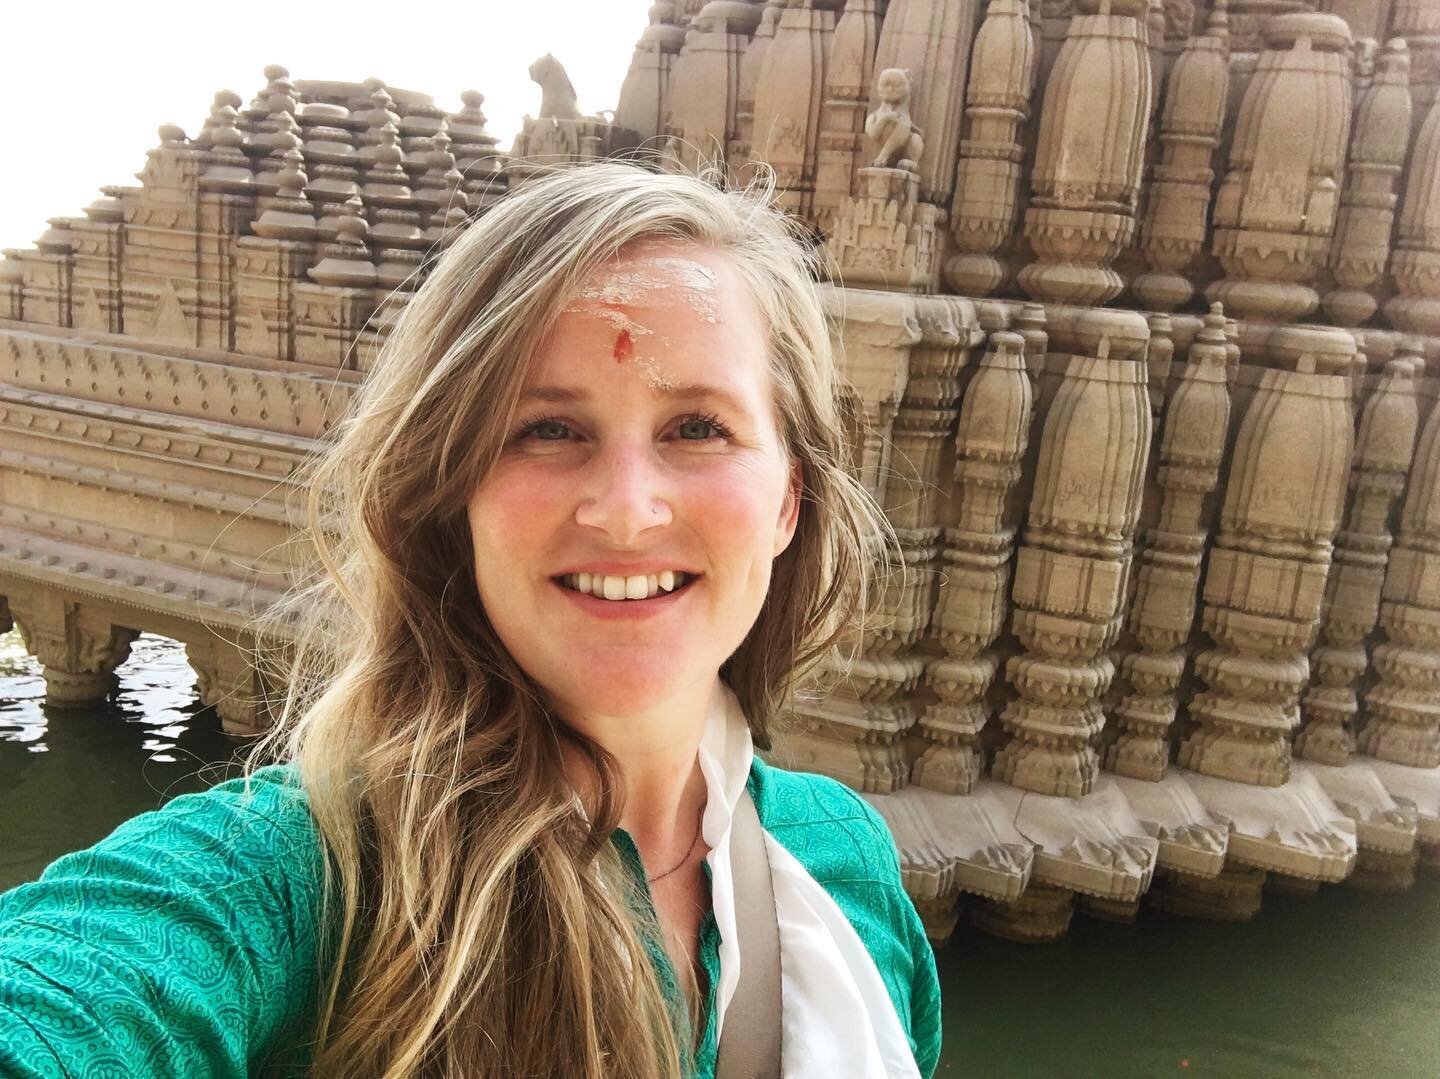 Now that I have the algorithm&rsquo;s attention with a shiny selfie, here are places we can donate to aid orgs in India. 
.
Seriously, yoga folks, it&rsquo;s the actual least we can do in the face of this apocalyptic crisis.

@missionoxygenindia 
.
@